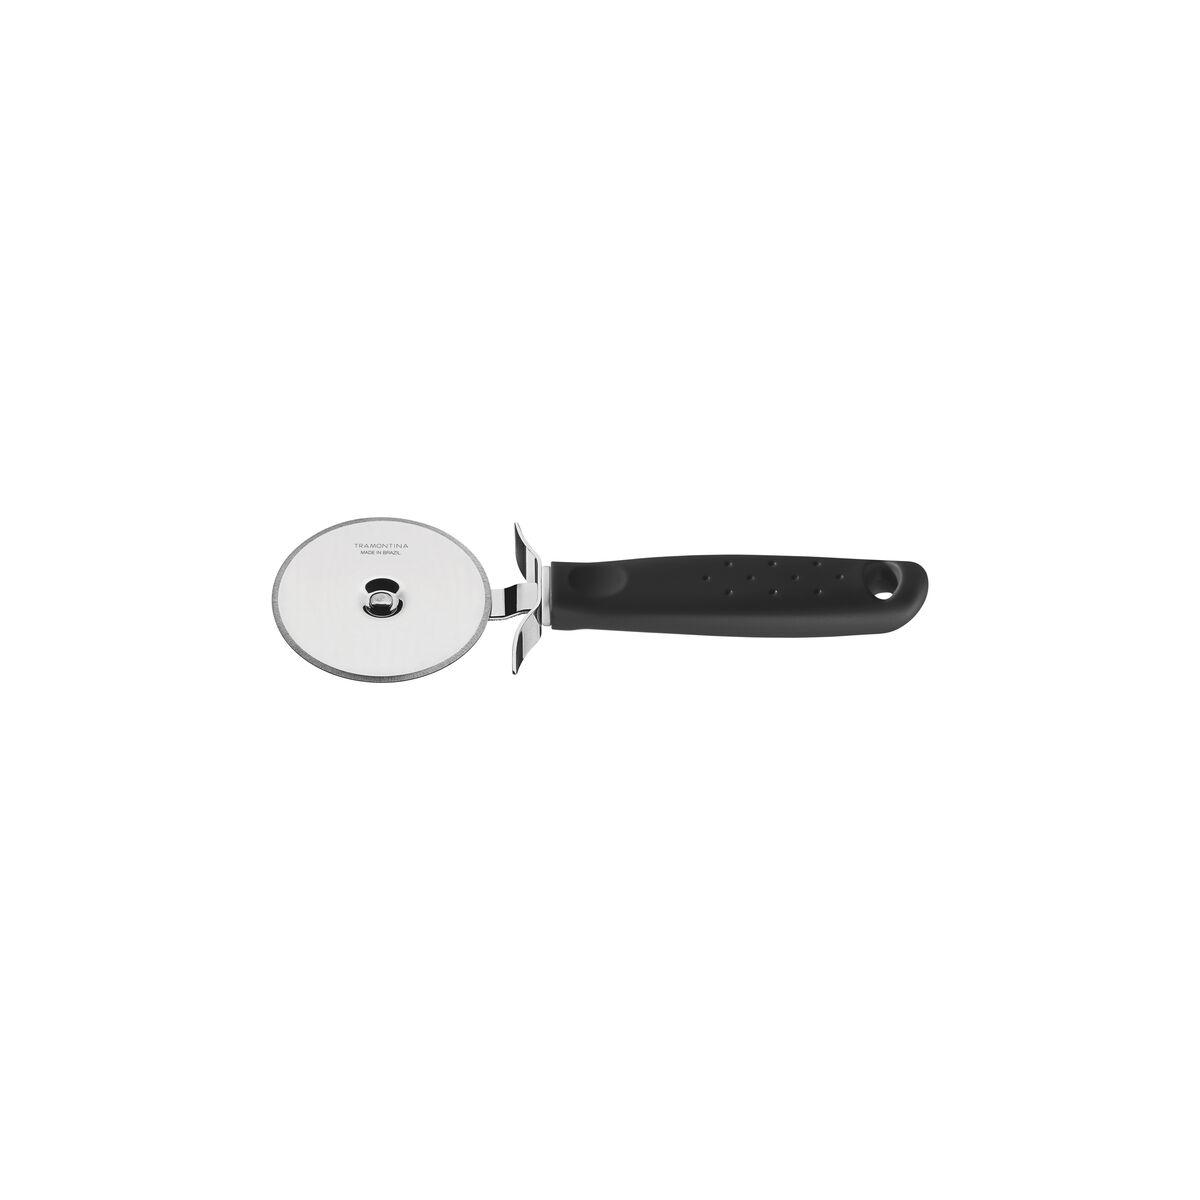 Tramontina Utilitá Stainless-Steel Pizza Cutter with Black Polypropylene Handle